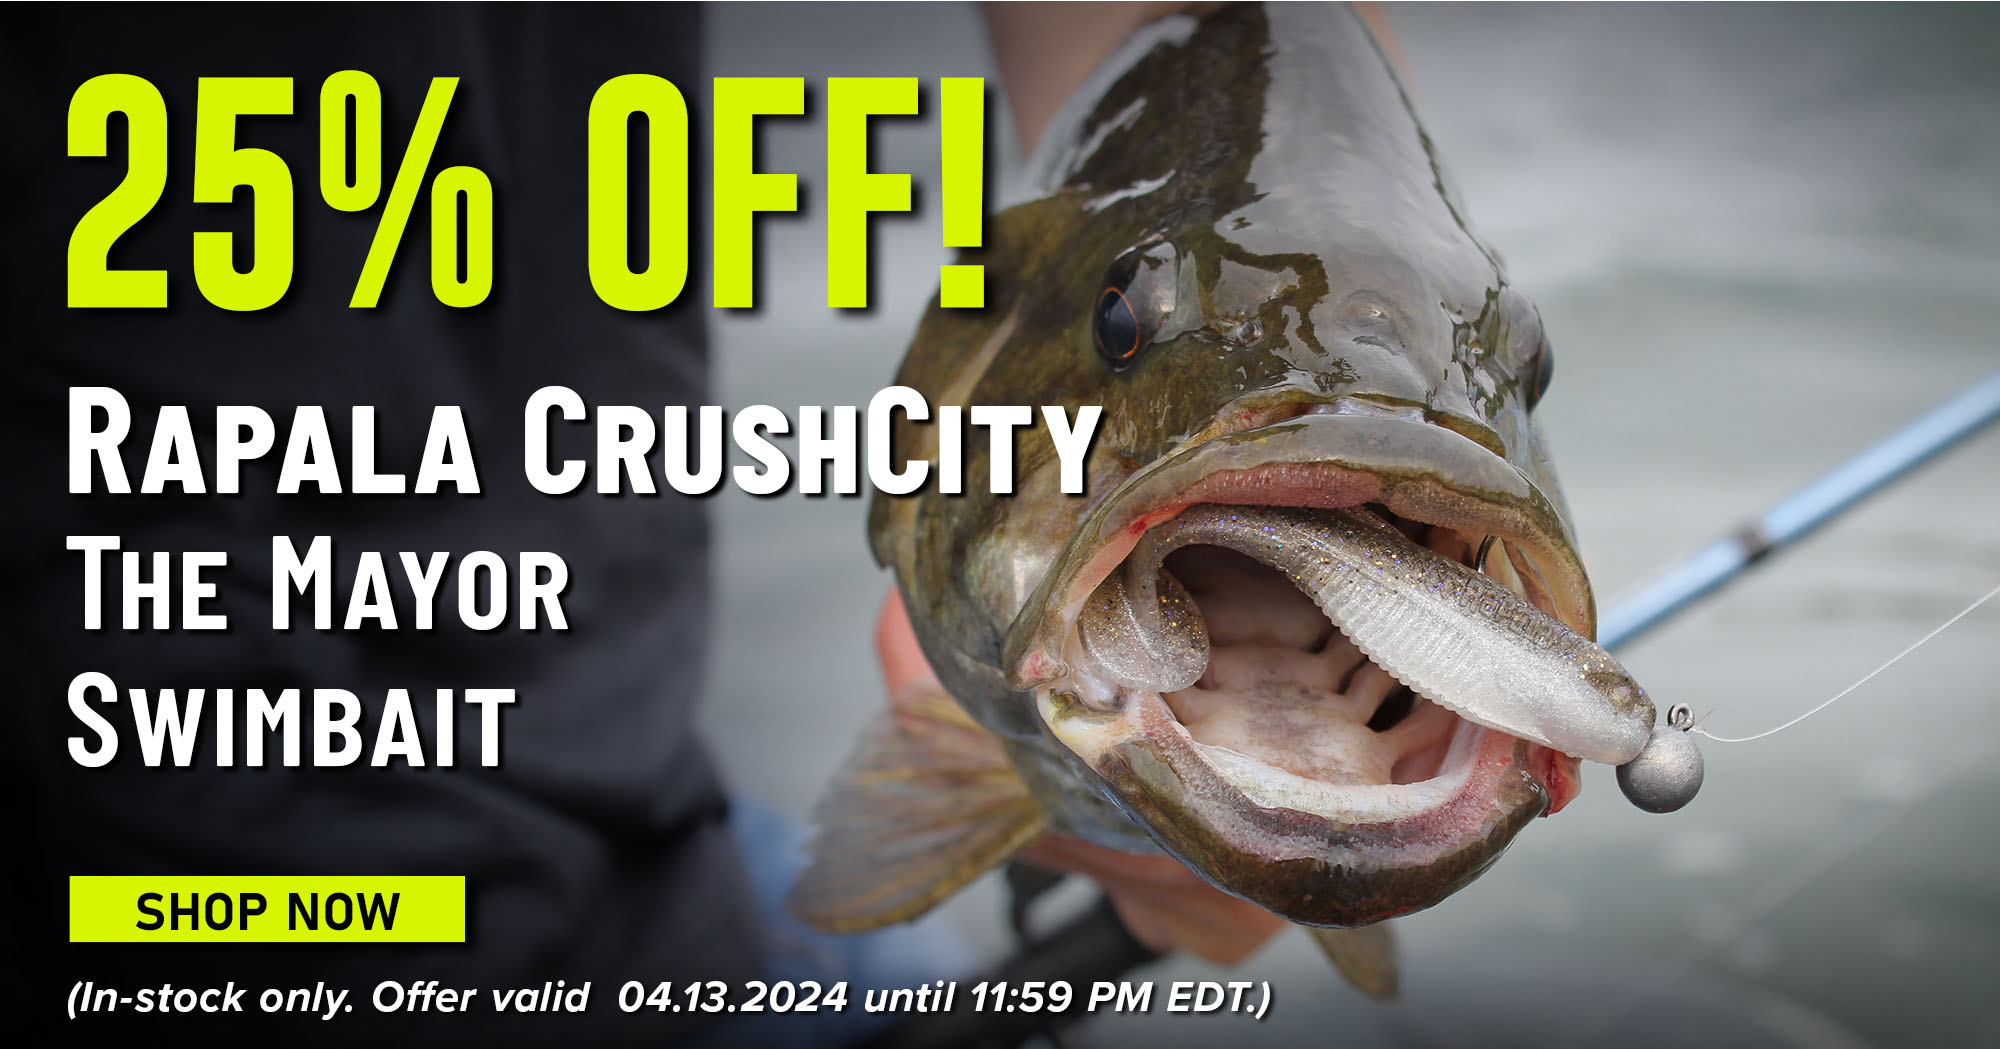 Rattlin' the Cage with this Spring Fishing Sale! - Fish USA